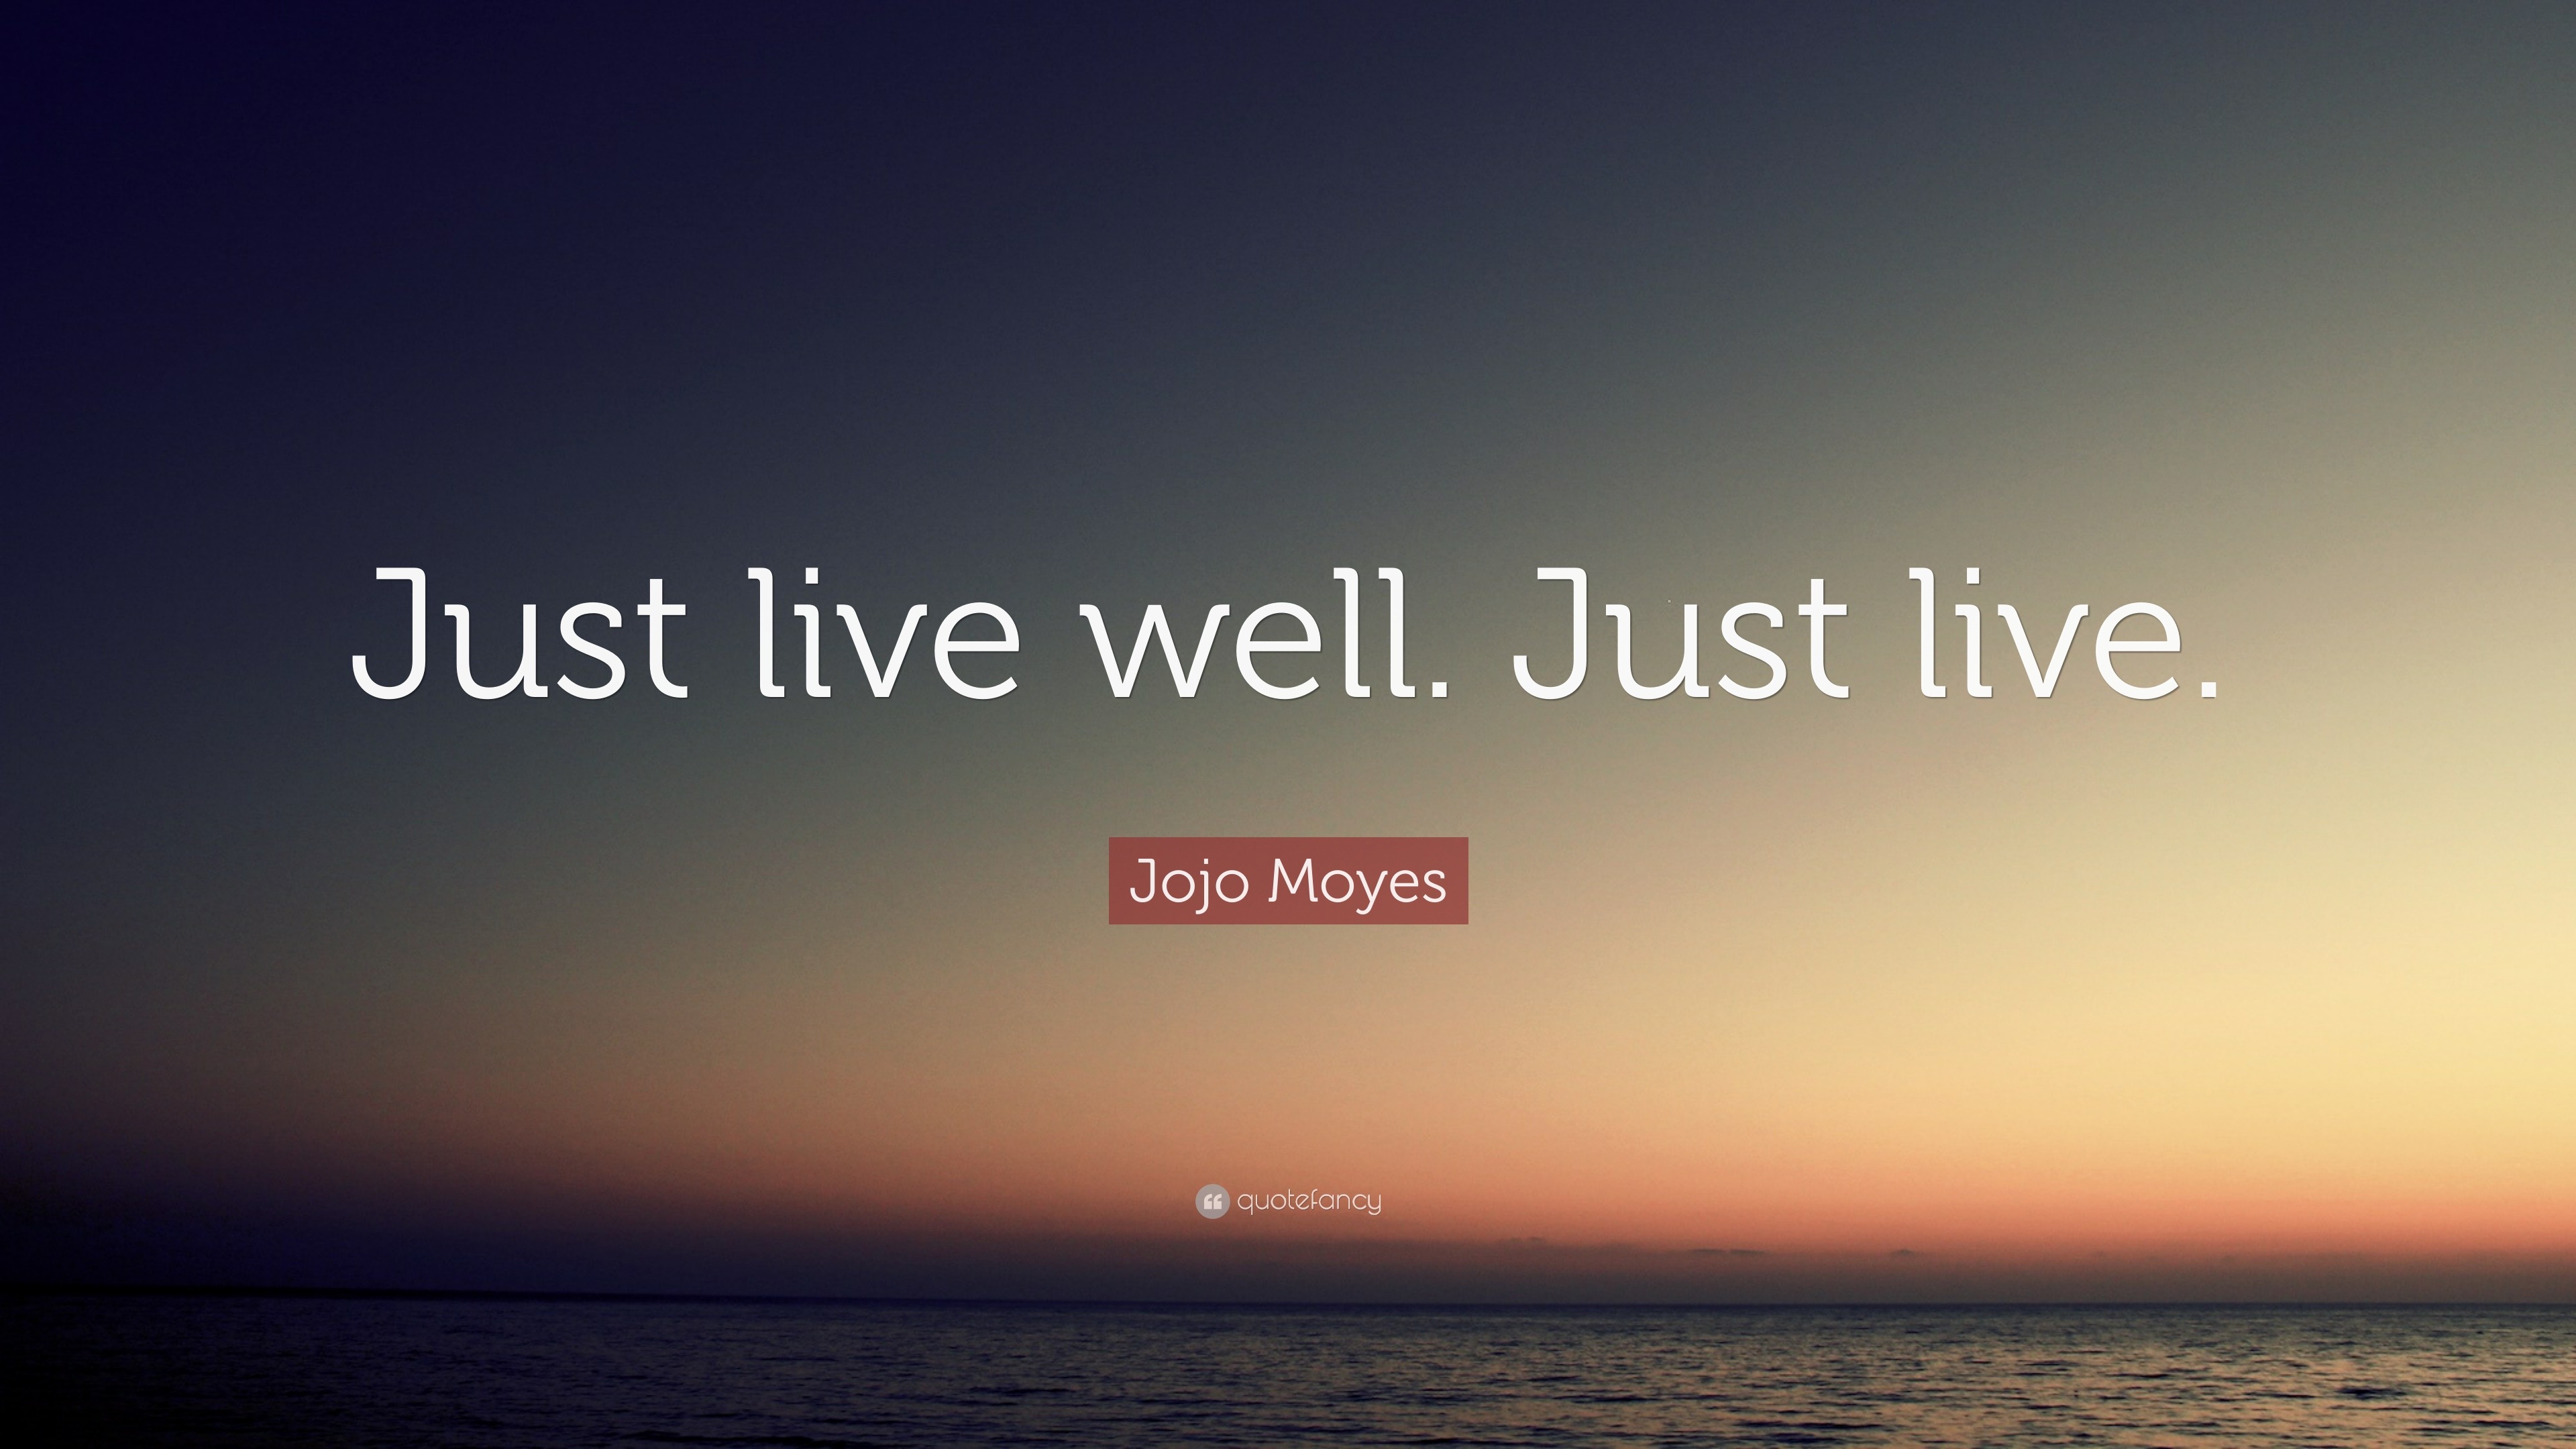 Jojo Moyes Quote: “Just live well. Just live.”